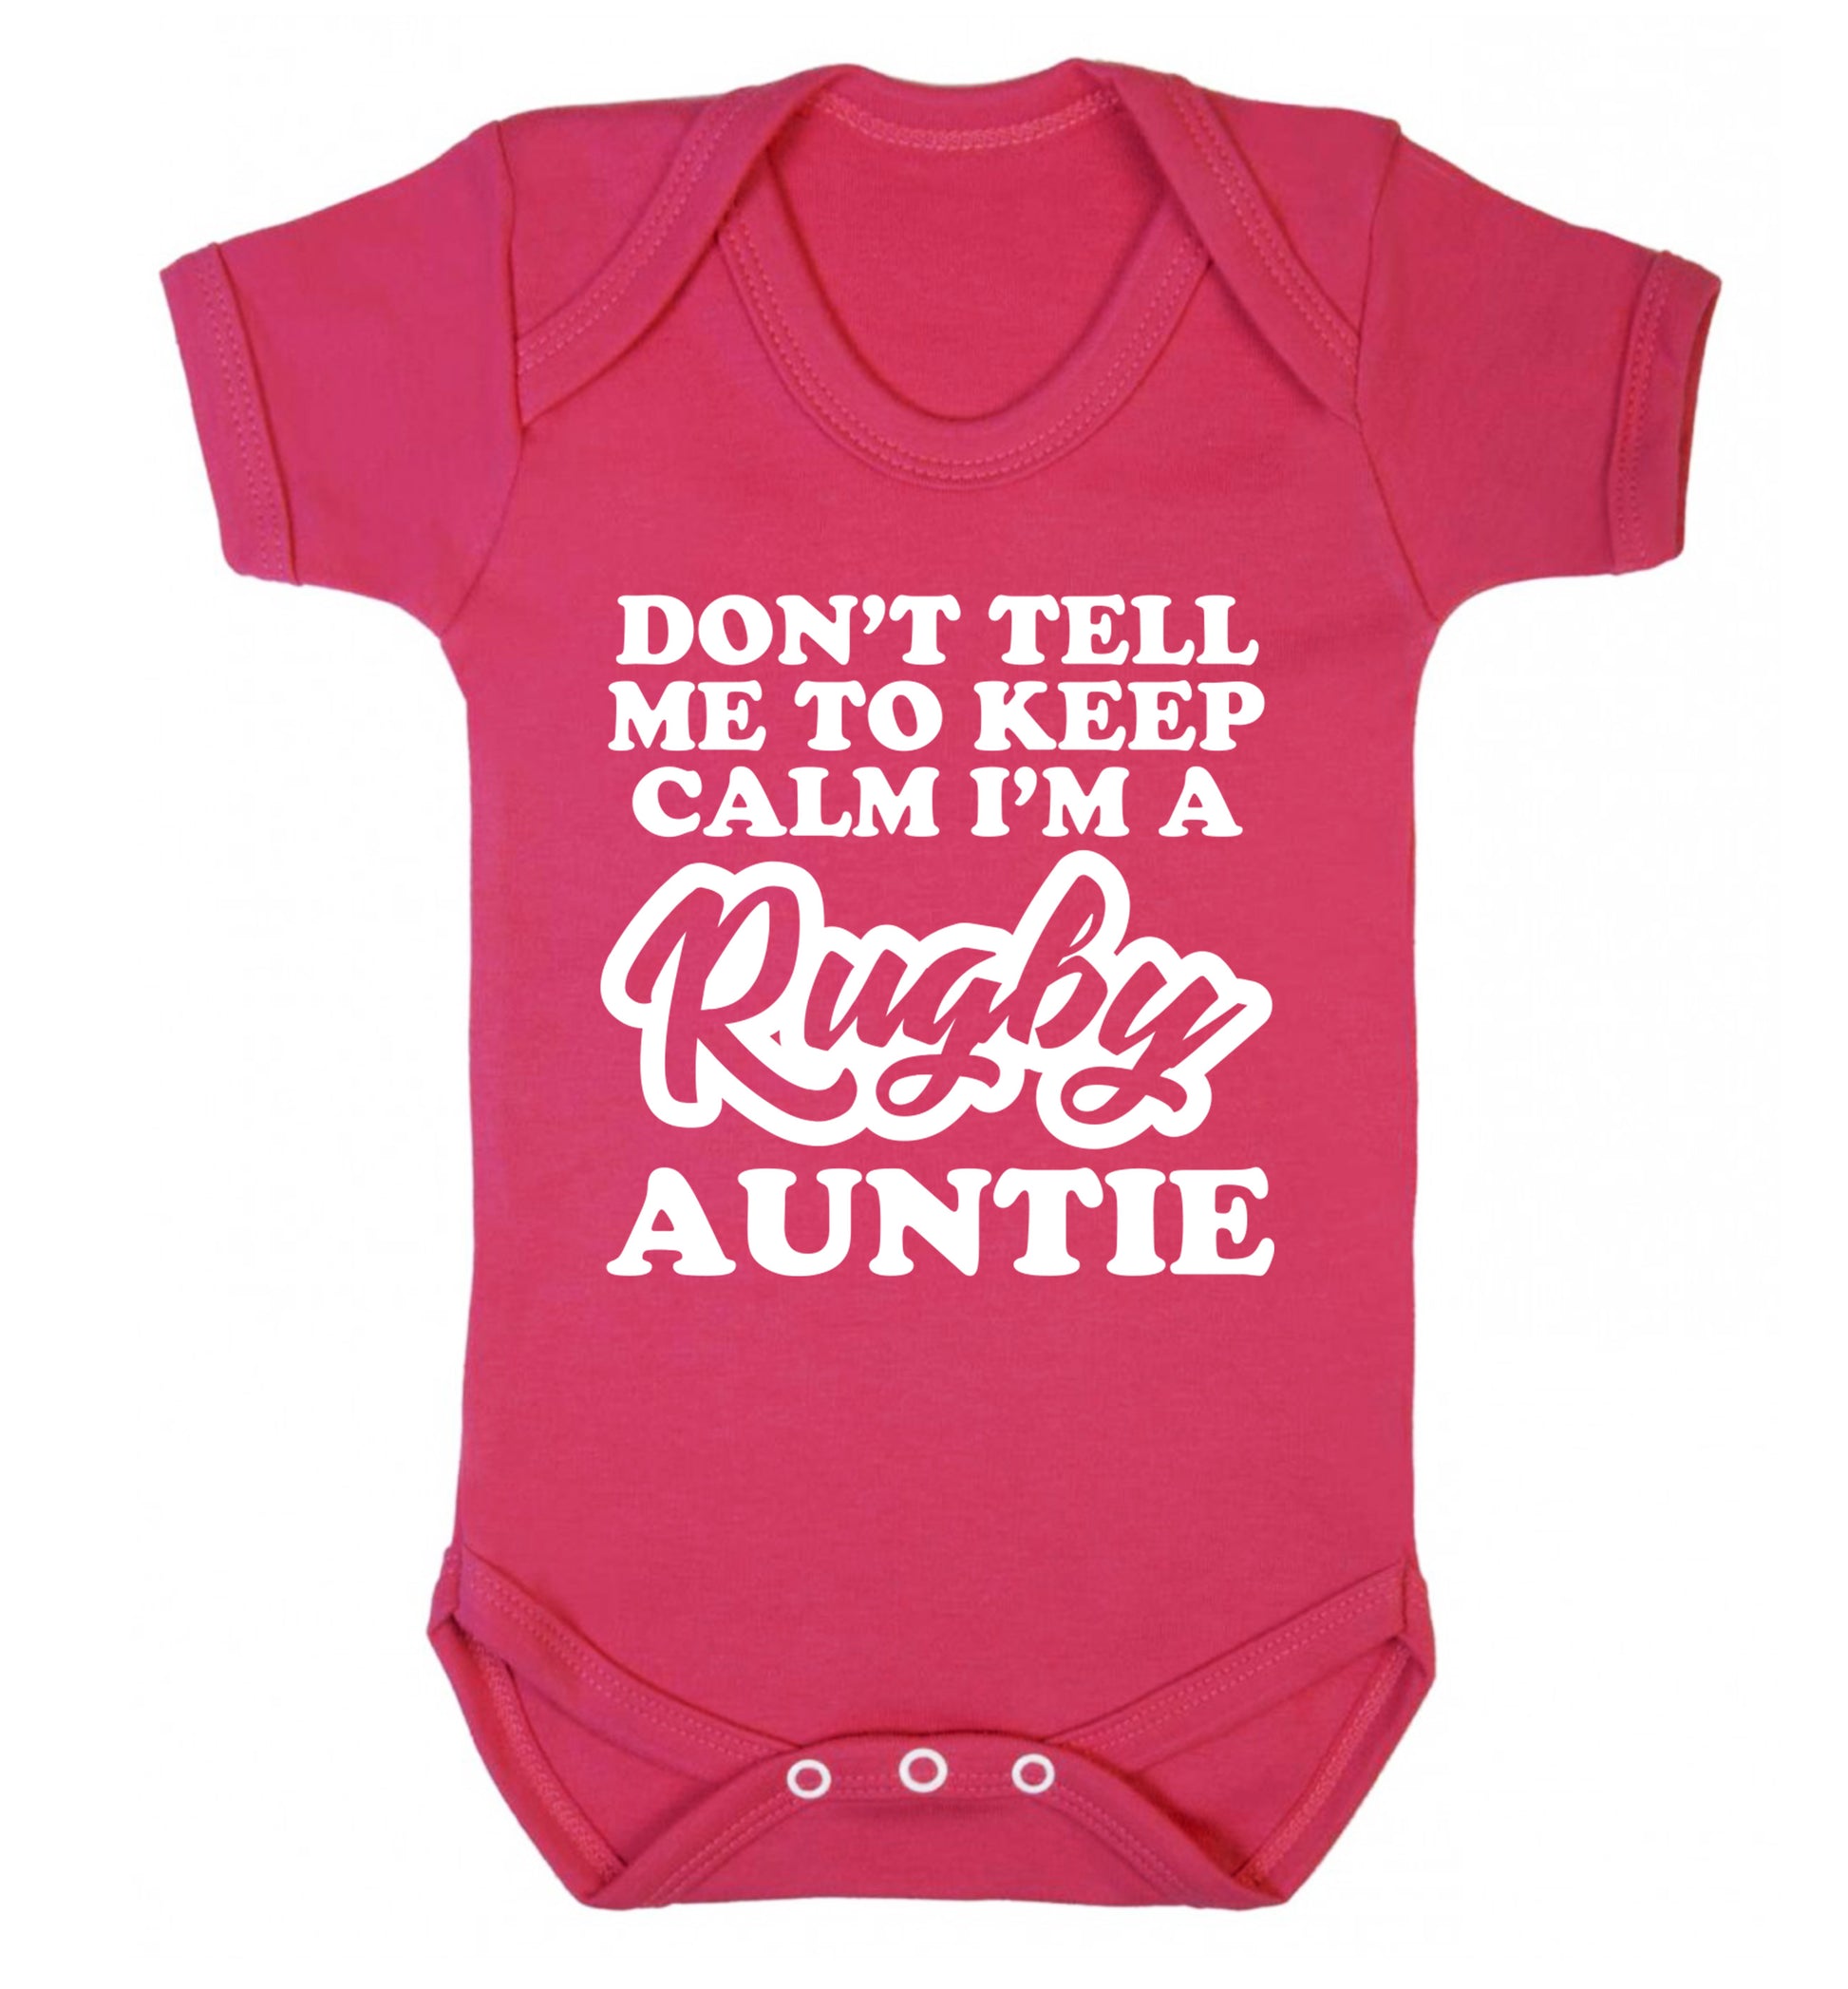 Don't tell me keep calm I'm a rugby auntie Baby Vest dark pink 18-24 months